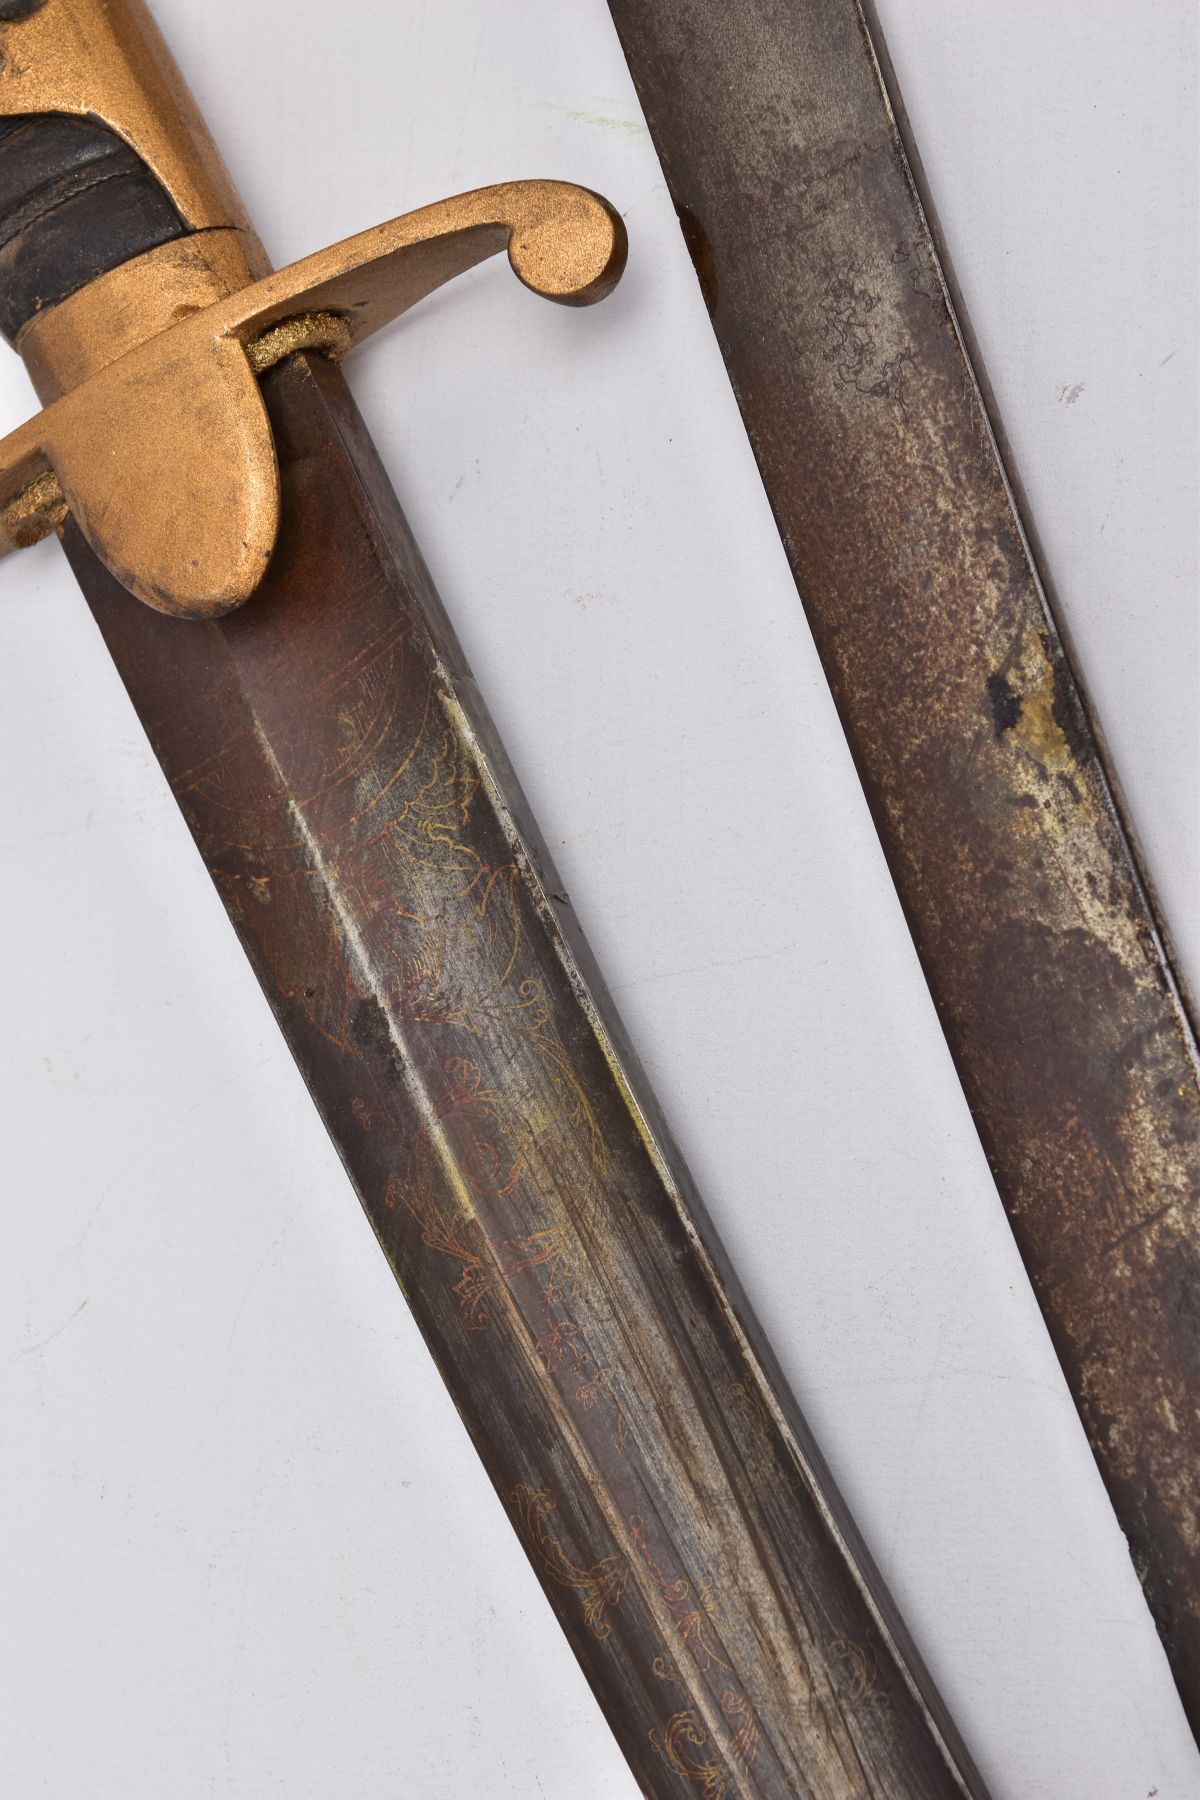 TWO LONG CURVED BLADE SWORDS, Eastern in design and looks, blade on one has been lacquered, etched - Image 9 of 10